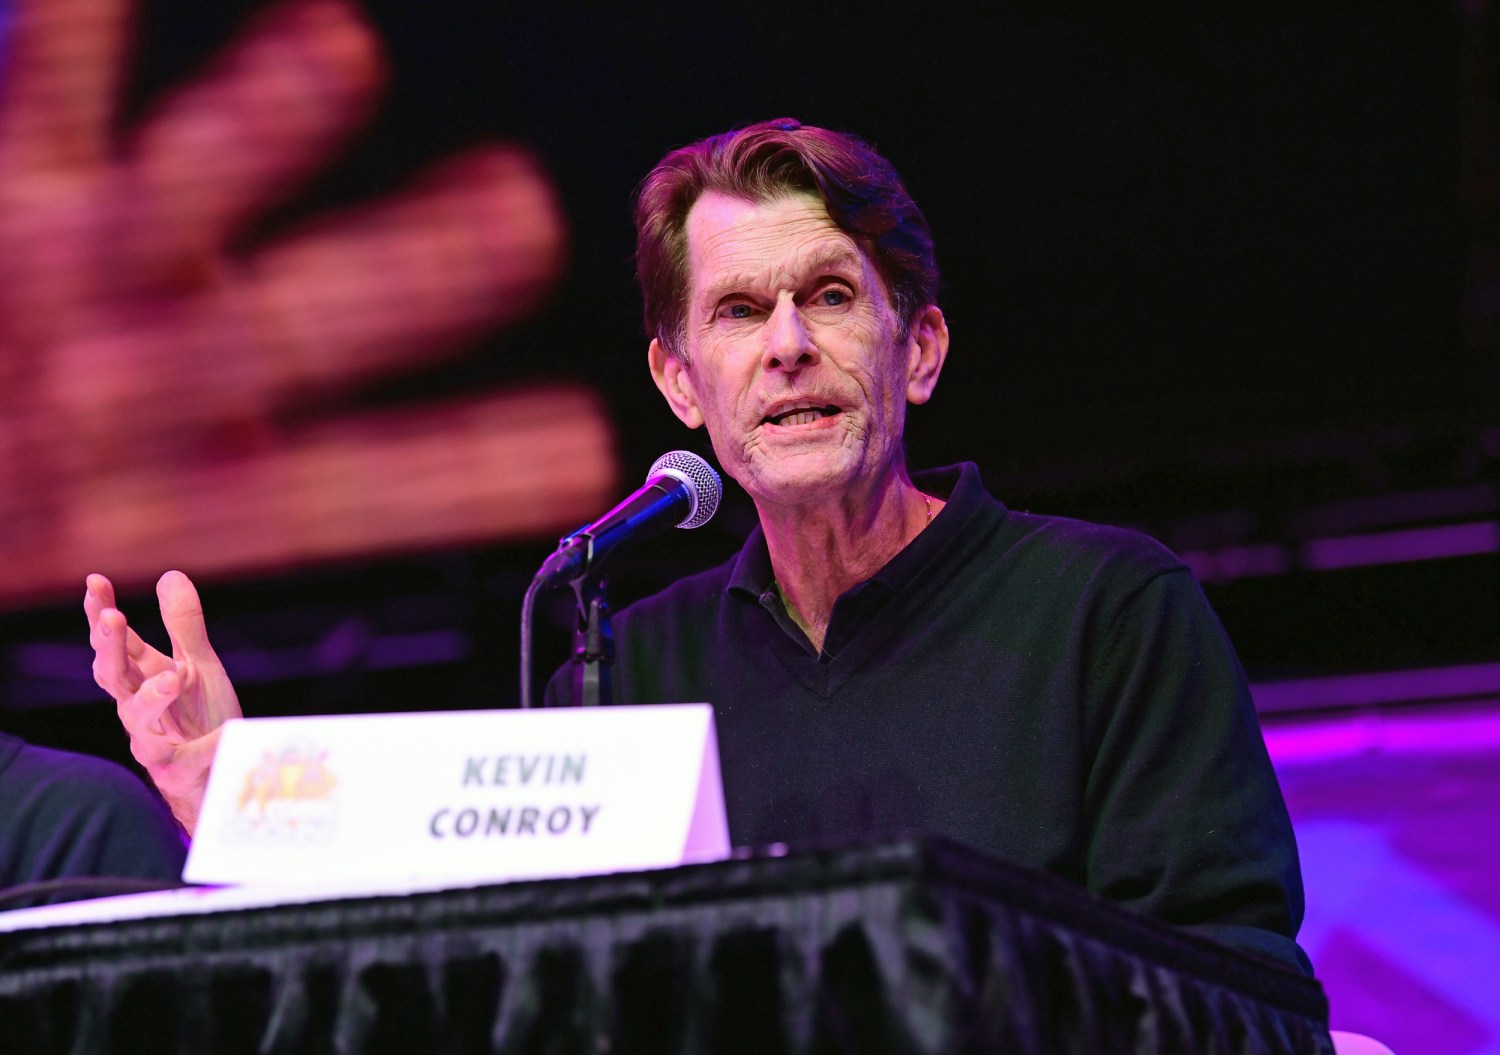 Terrificon 2022 Welcomes Kevin Conroy